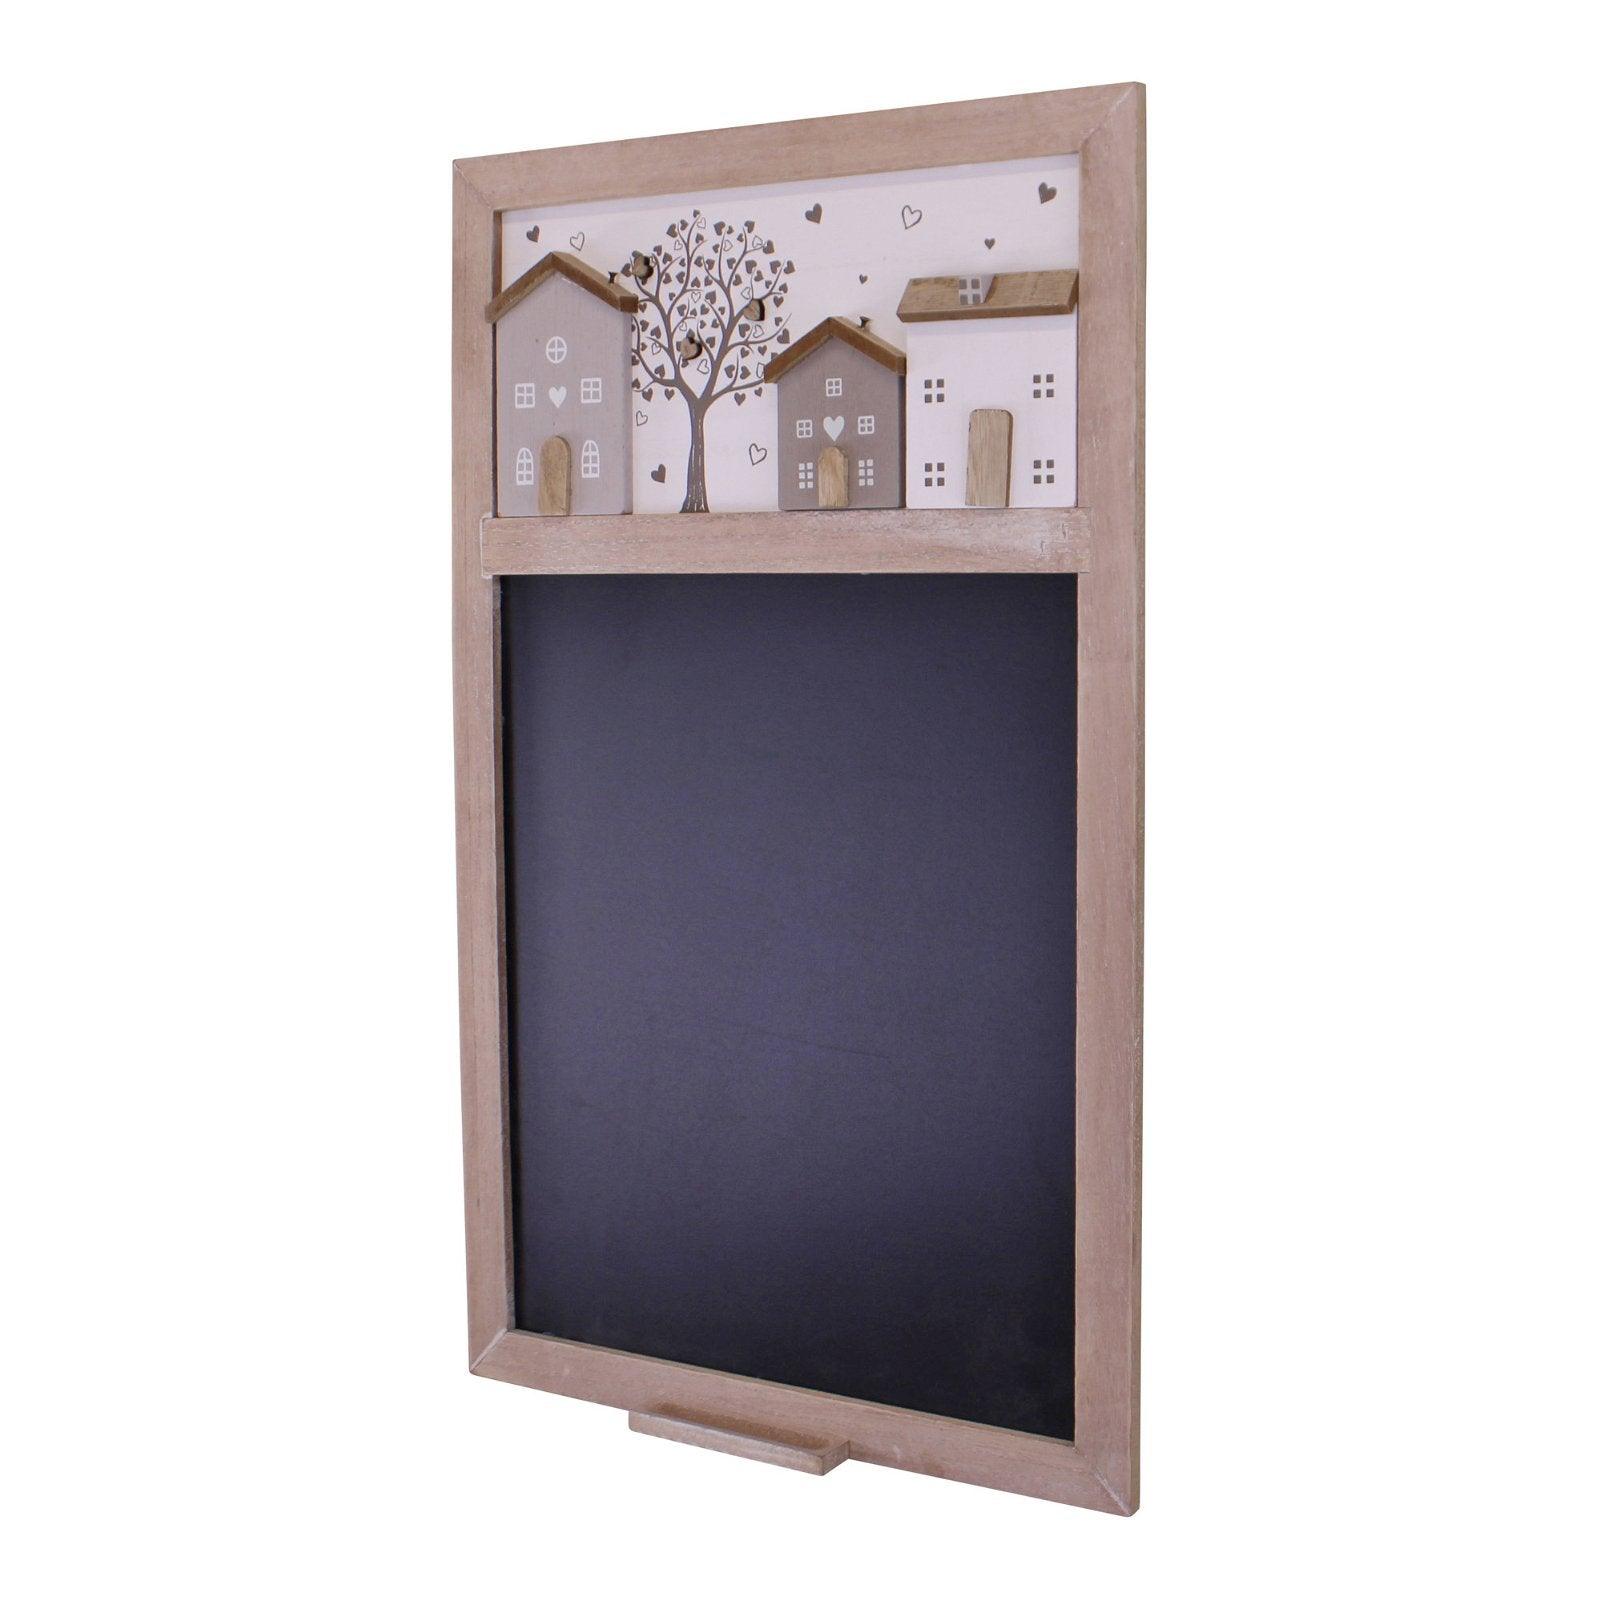 View Wall Mounted Blackboard Wooden Houses Design information